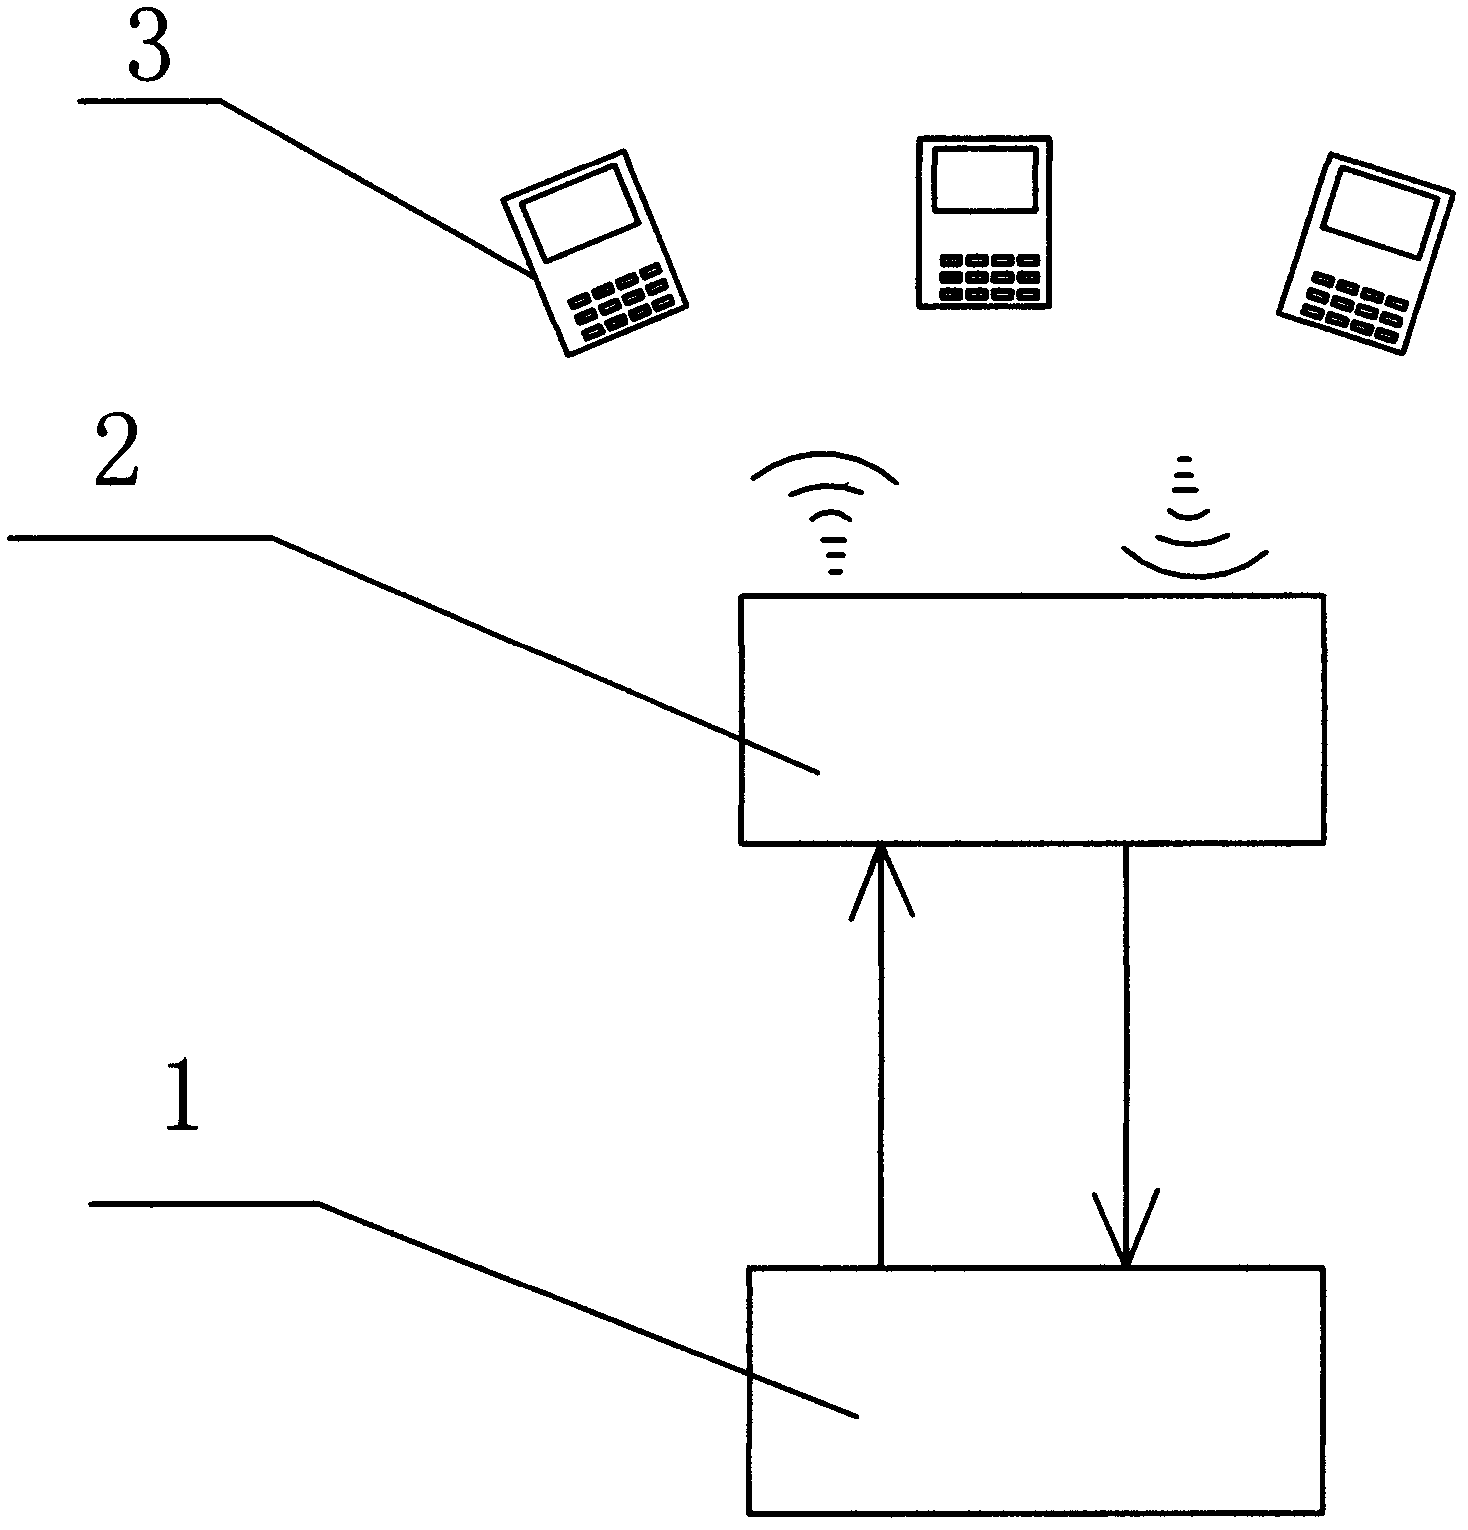 Mobile phone based on Bluetooth transmission online interactive game, online system and implementation method thereof